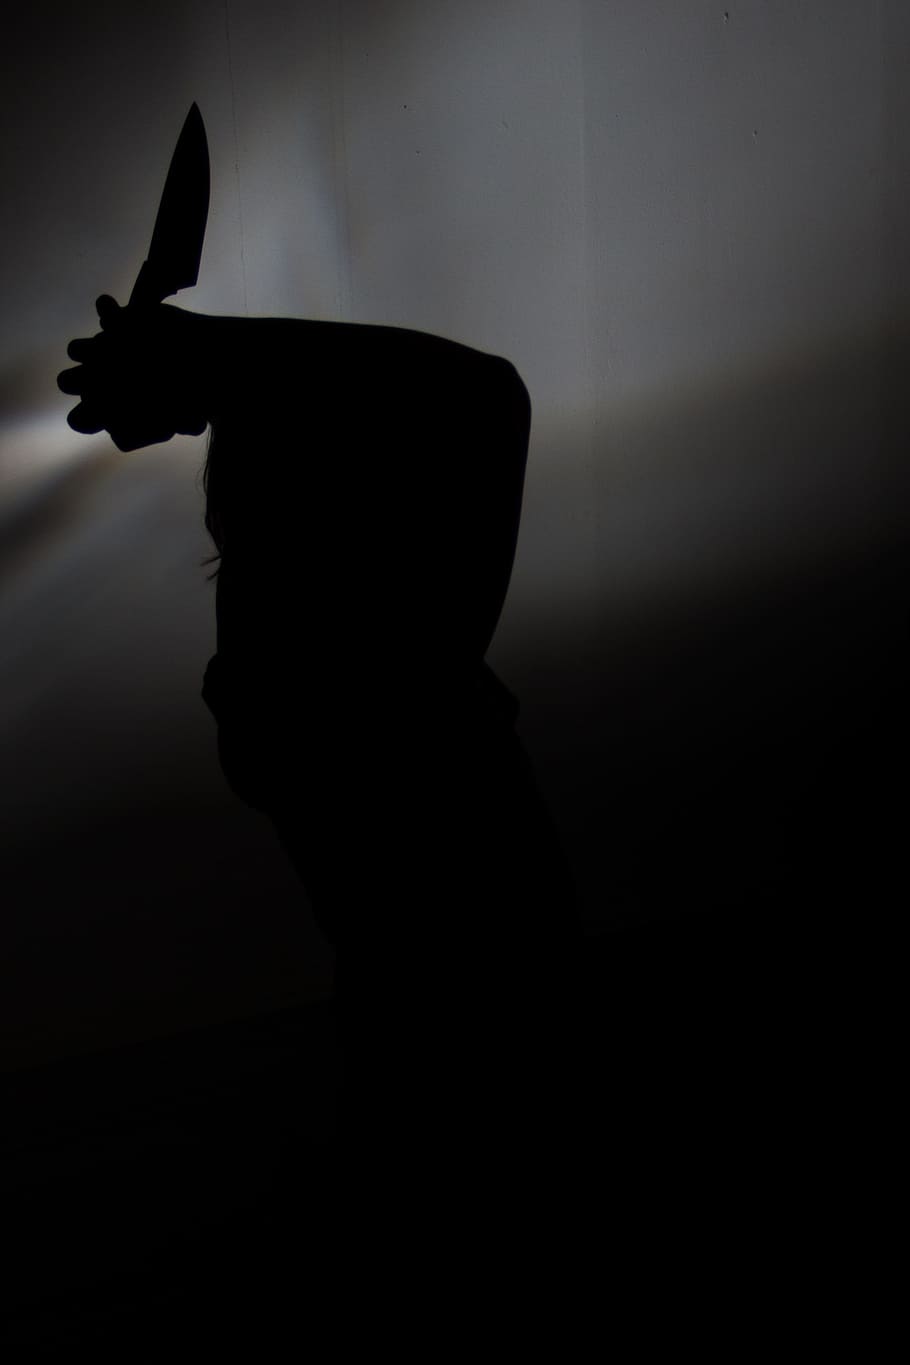 silhouette photo, person, holding, knife, photograph, murder, fear, voltage, attack, suspected